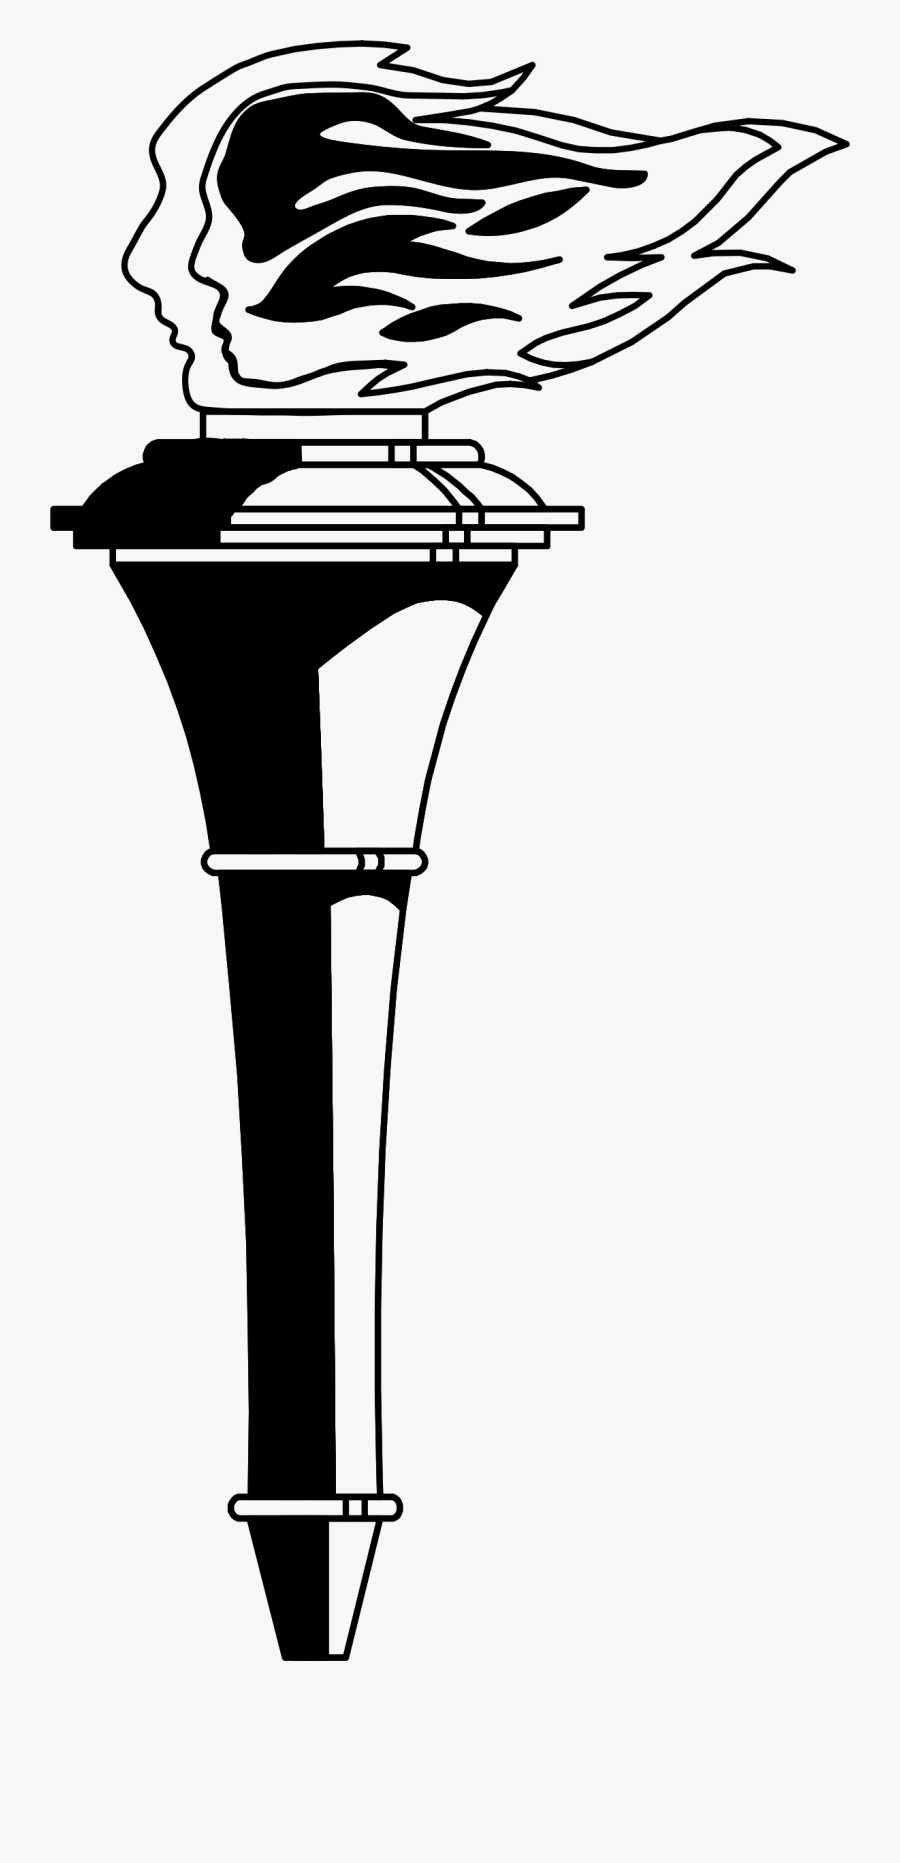 Torch - Statue Of Liberty Torch Clipart, Transparent Clipart